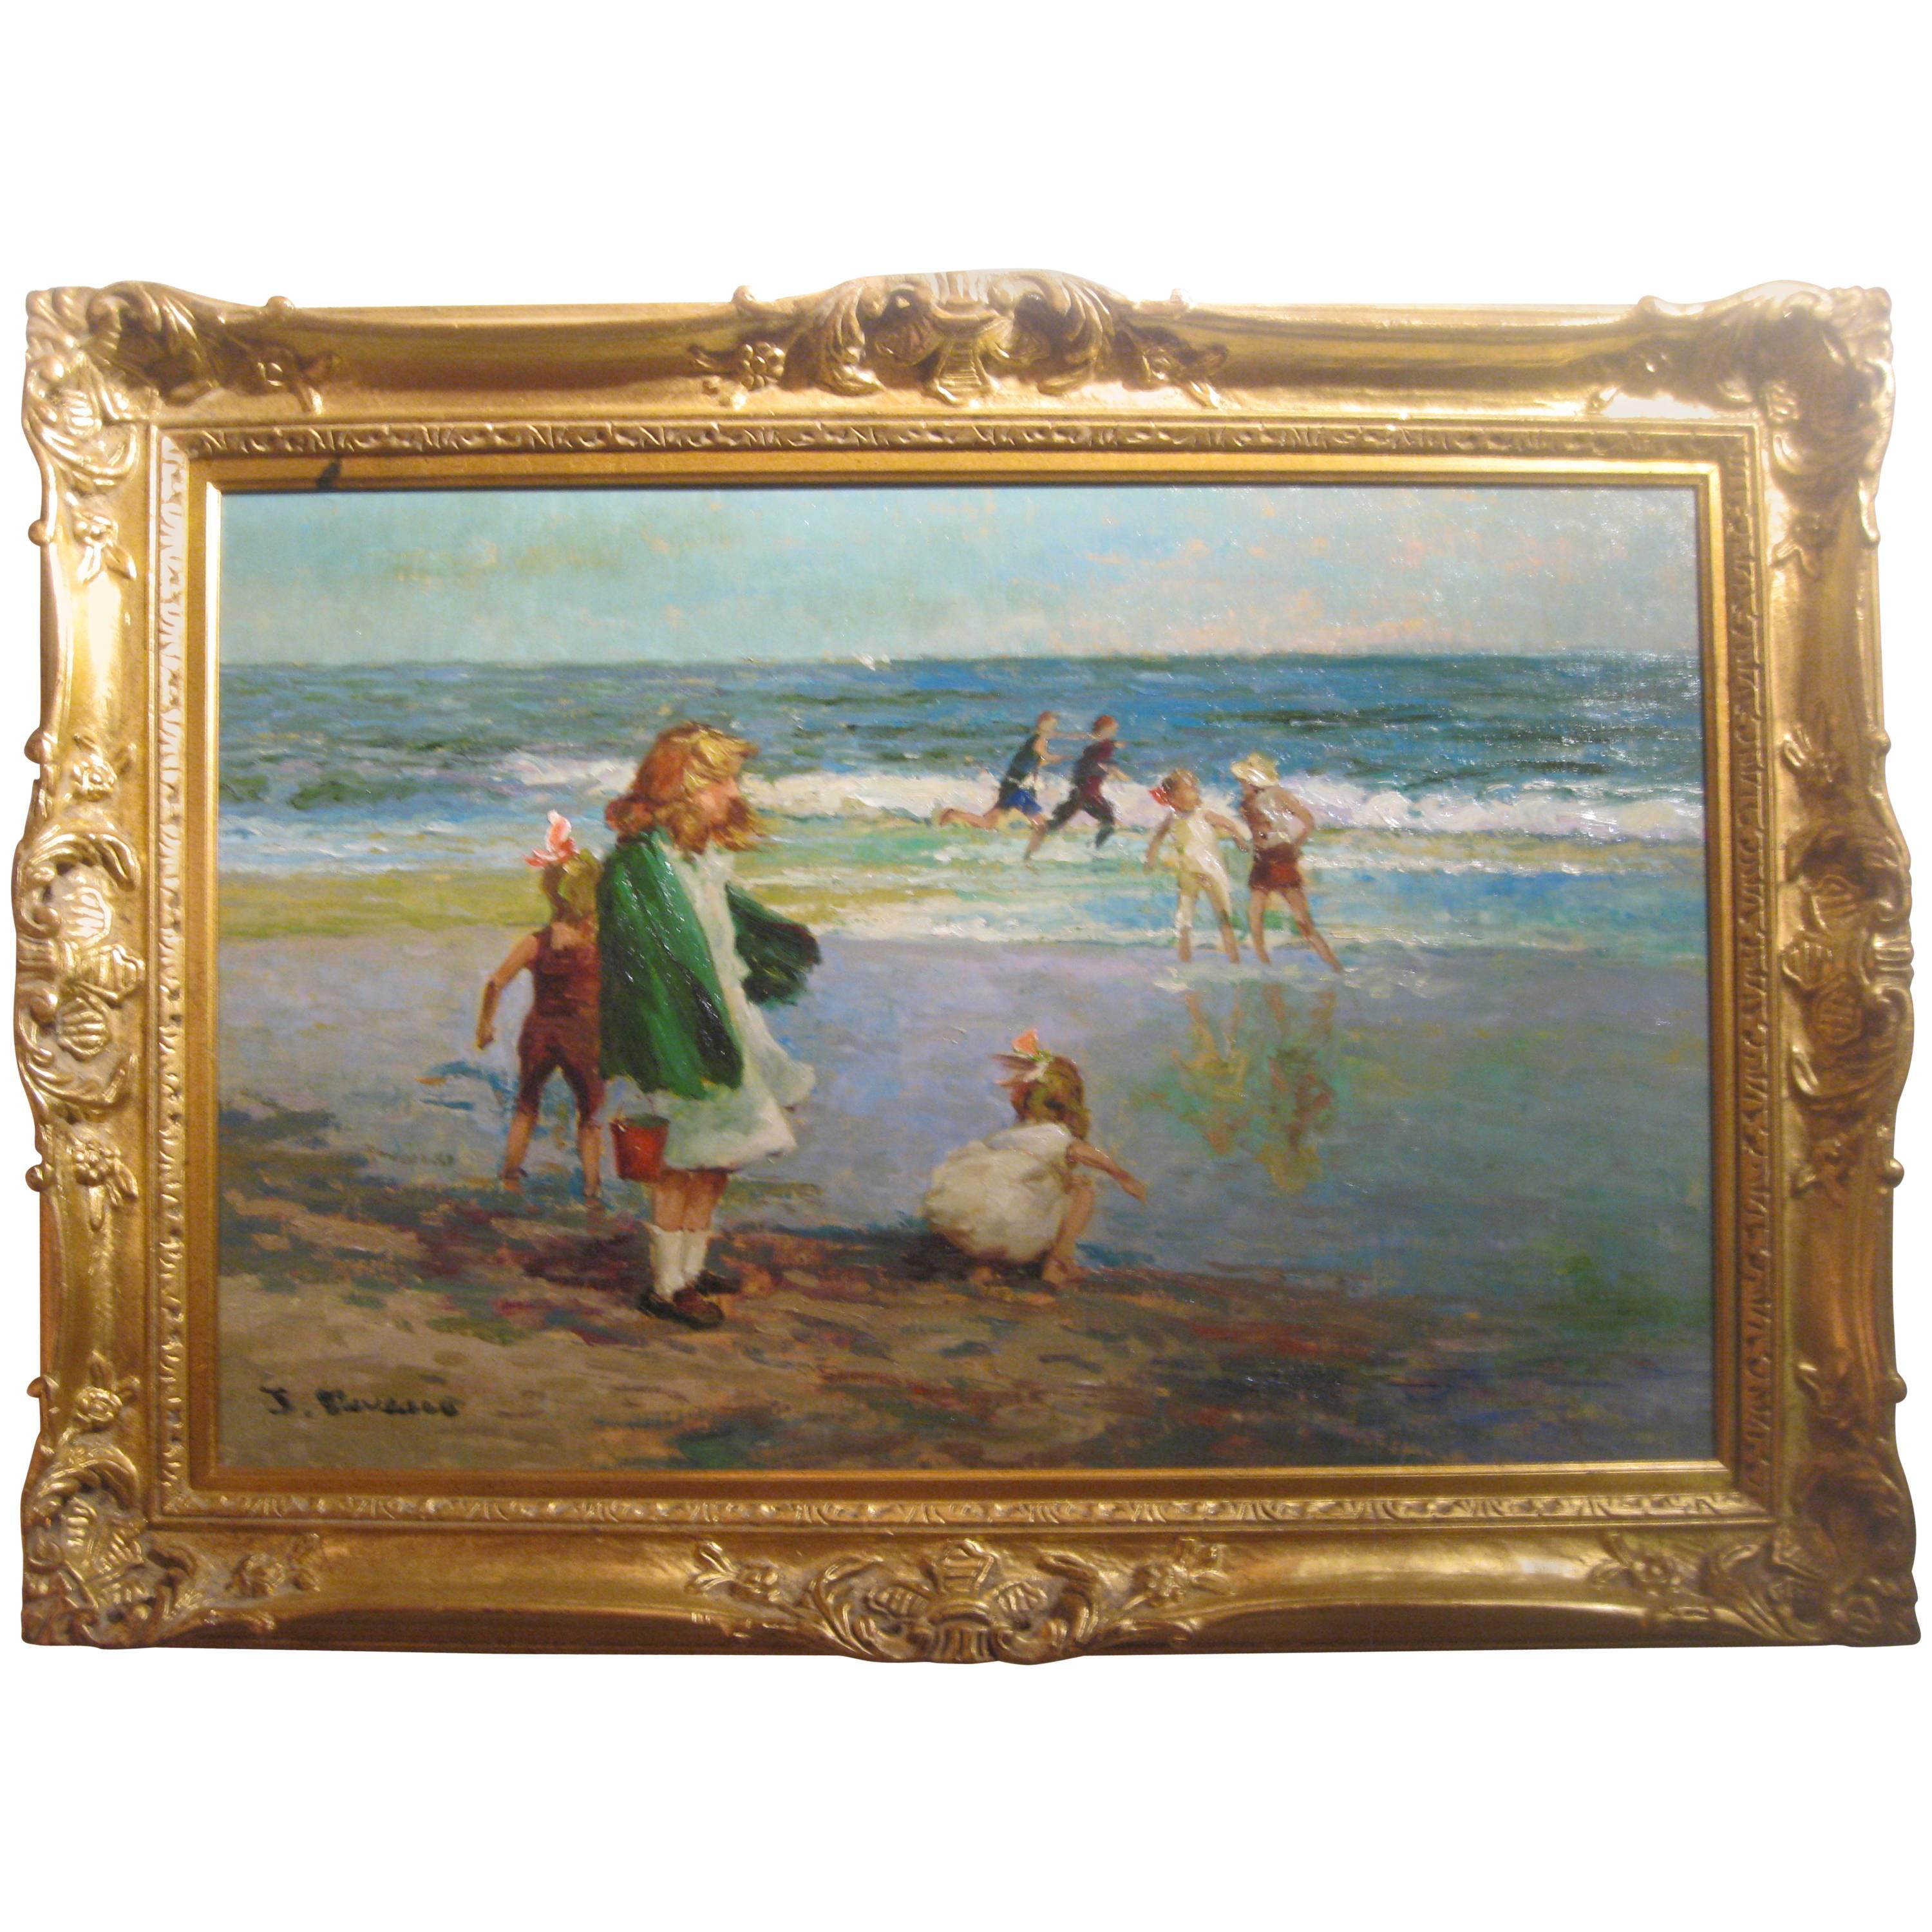 "Children at the Beach" Oil Painting in Gilt Frame by Jacques Deveau  (1937-)